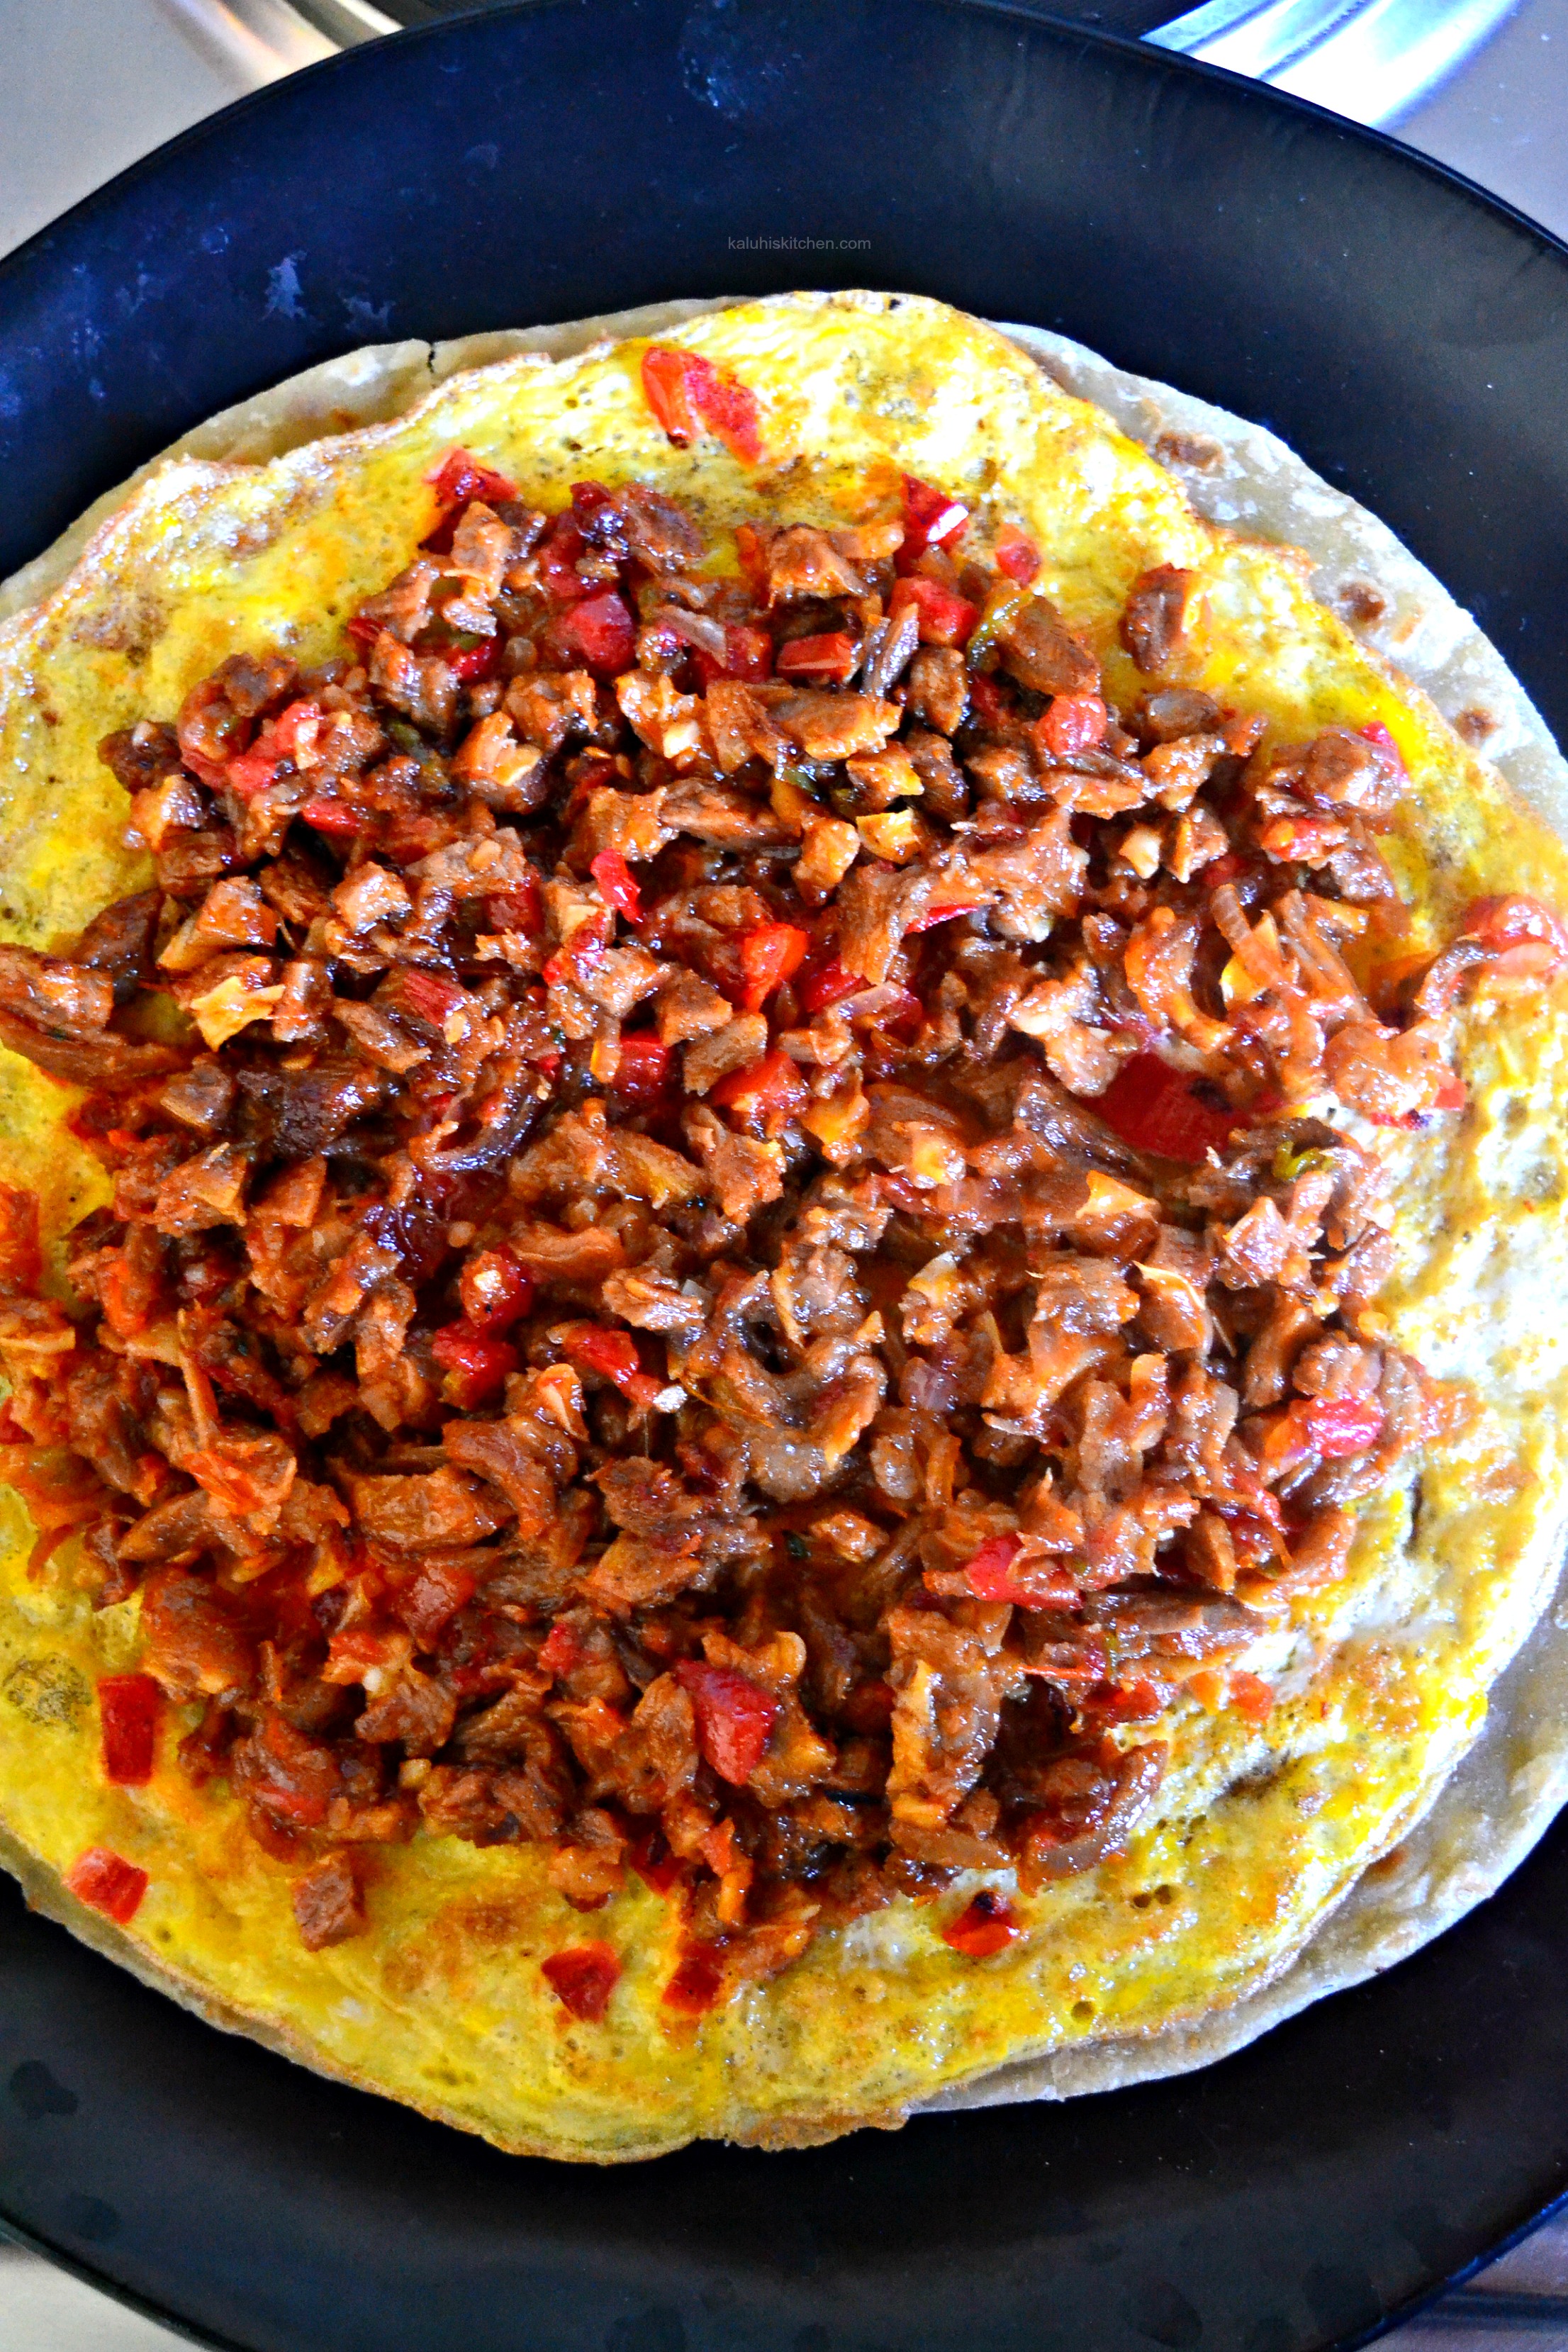 add-the-third-layer-the-meat-over-the-omelette-and-spread-it-over-with-majotrity-being-toward-the-center_kaluhiskitchen-com